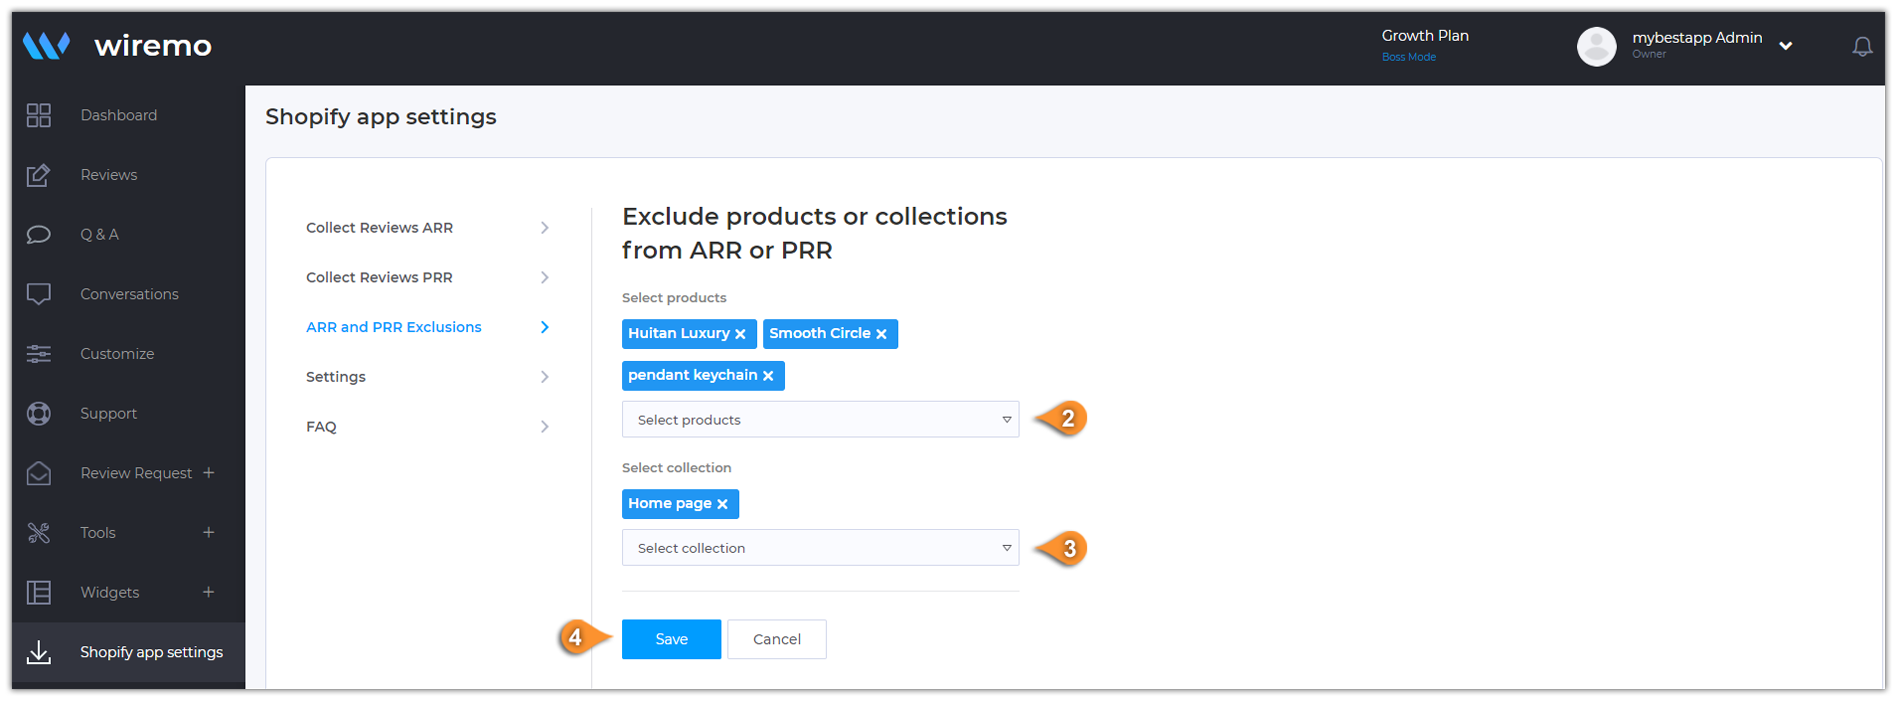 How to exclude products or collections from review request campaigns in the Wiremo app for Shopify